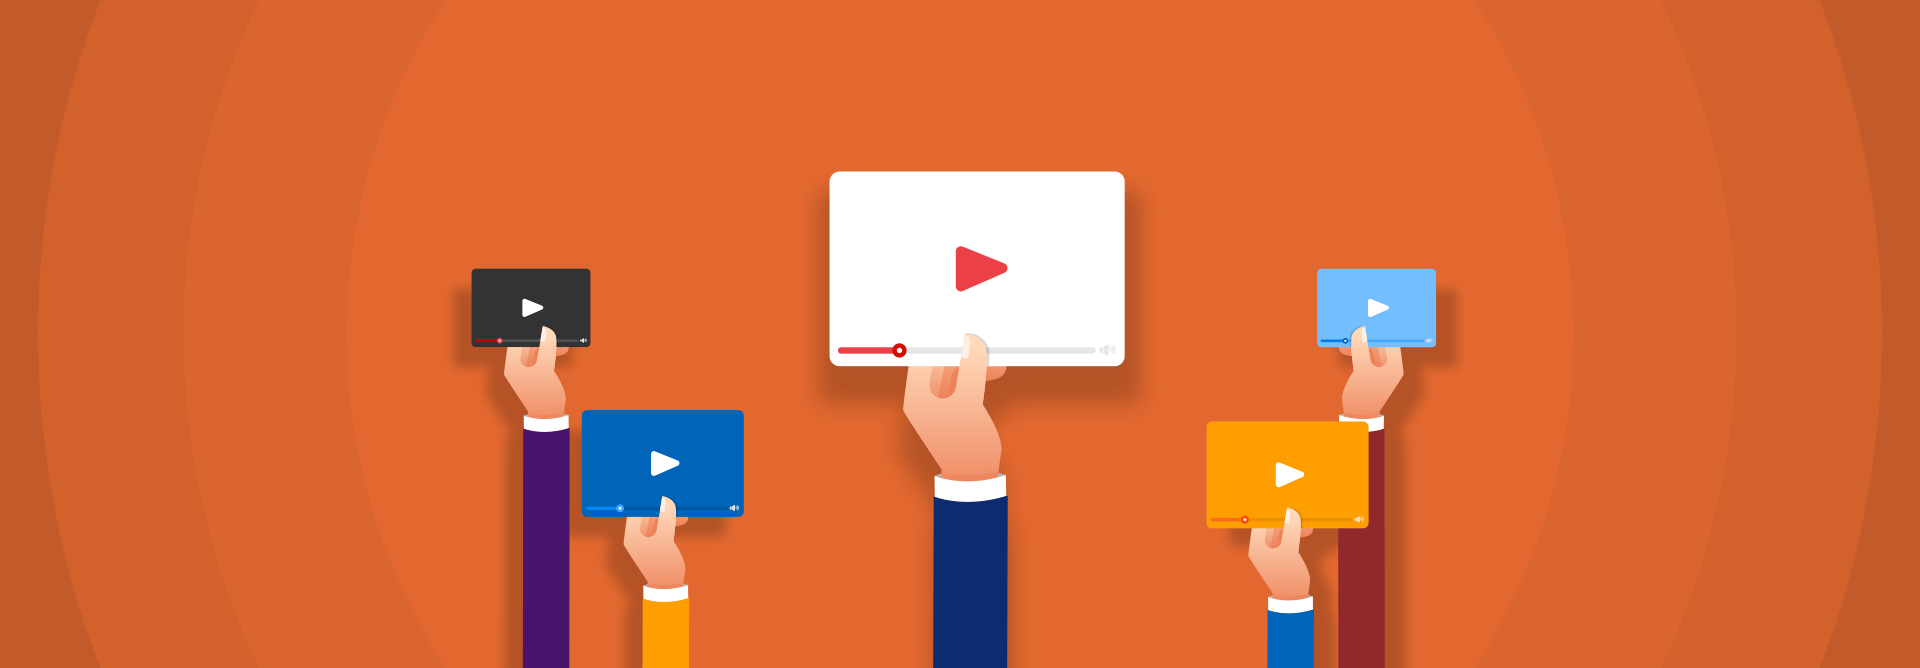 10 Easy Ideas To Use & Promote More Video Content